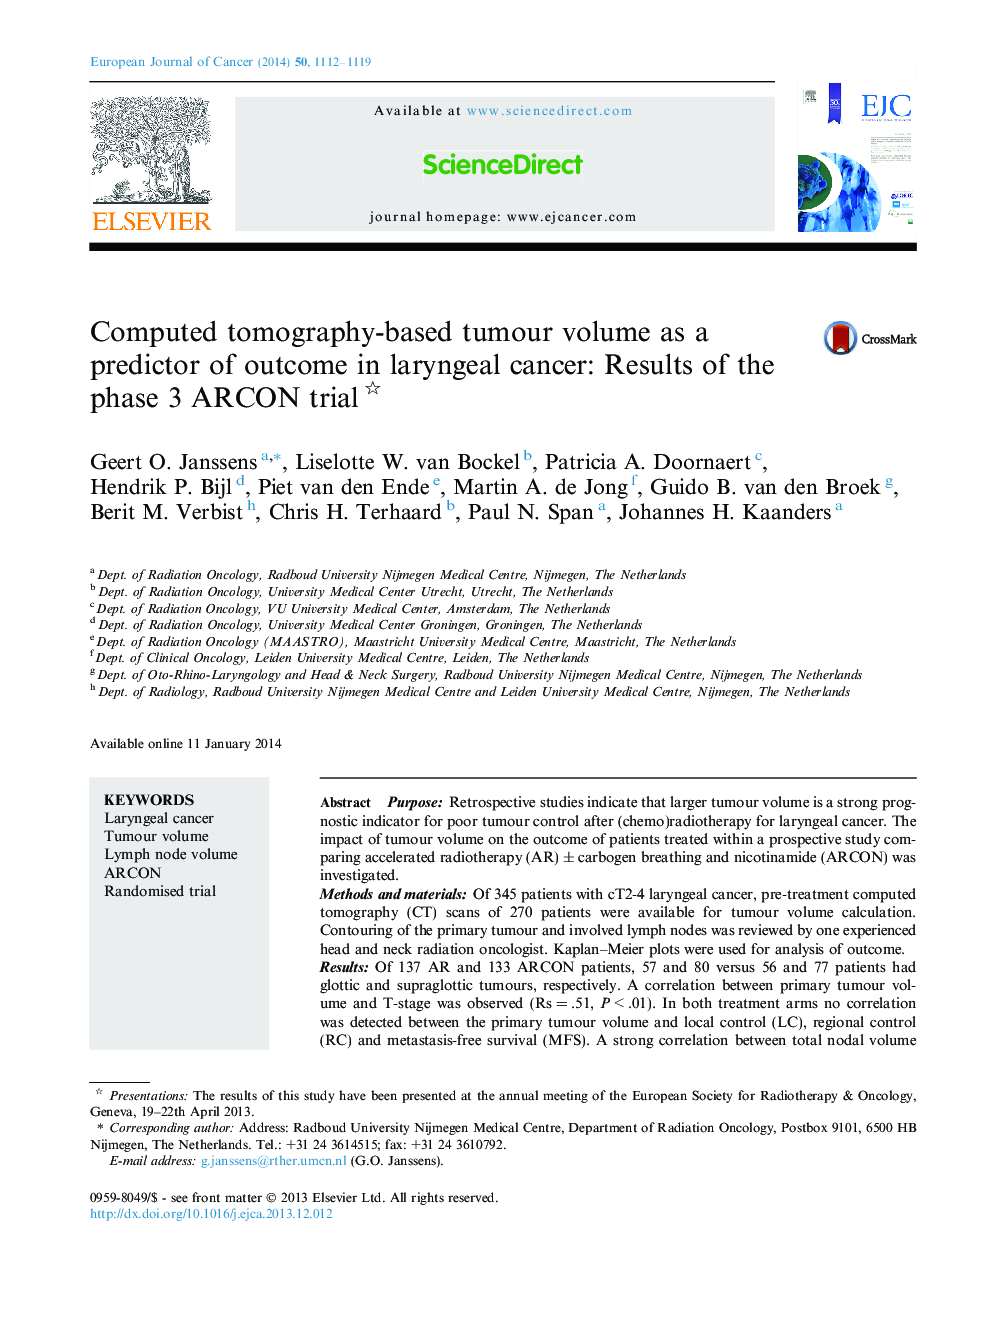 Computed tomography-based tumour volume as a predictor of outcome in laryngeal cancer: Results of the phase 3 ARCON trial